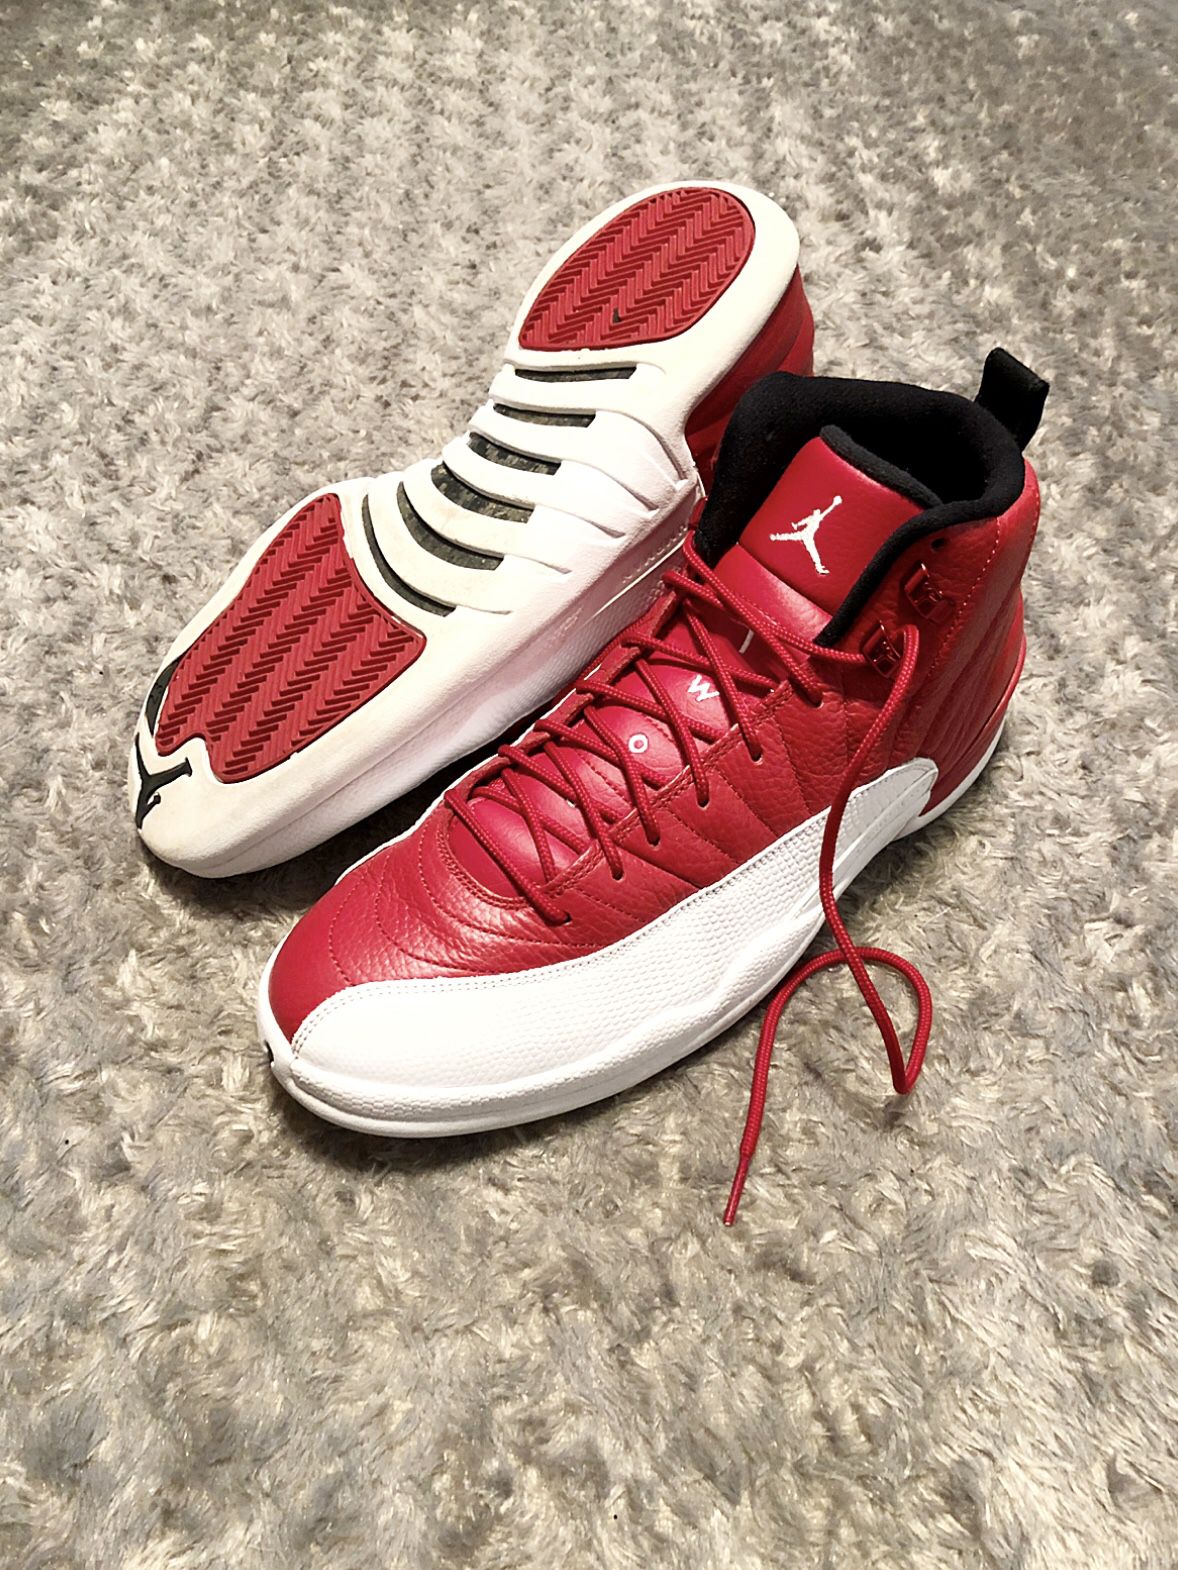 Mens Air jordan 12 Retro Size 11 comes with box. 1000% authentic! Color red & white. Minor creasing on the front other then that excellent condition!